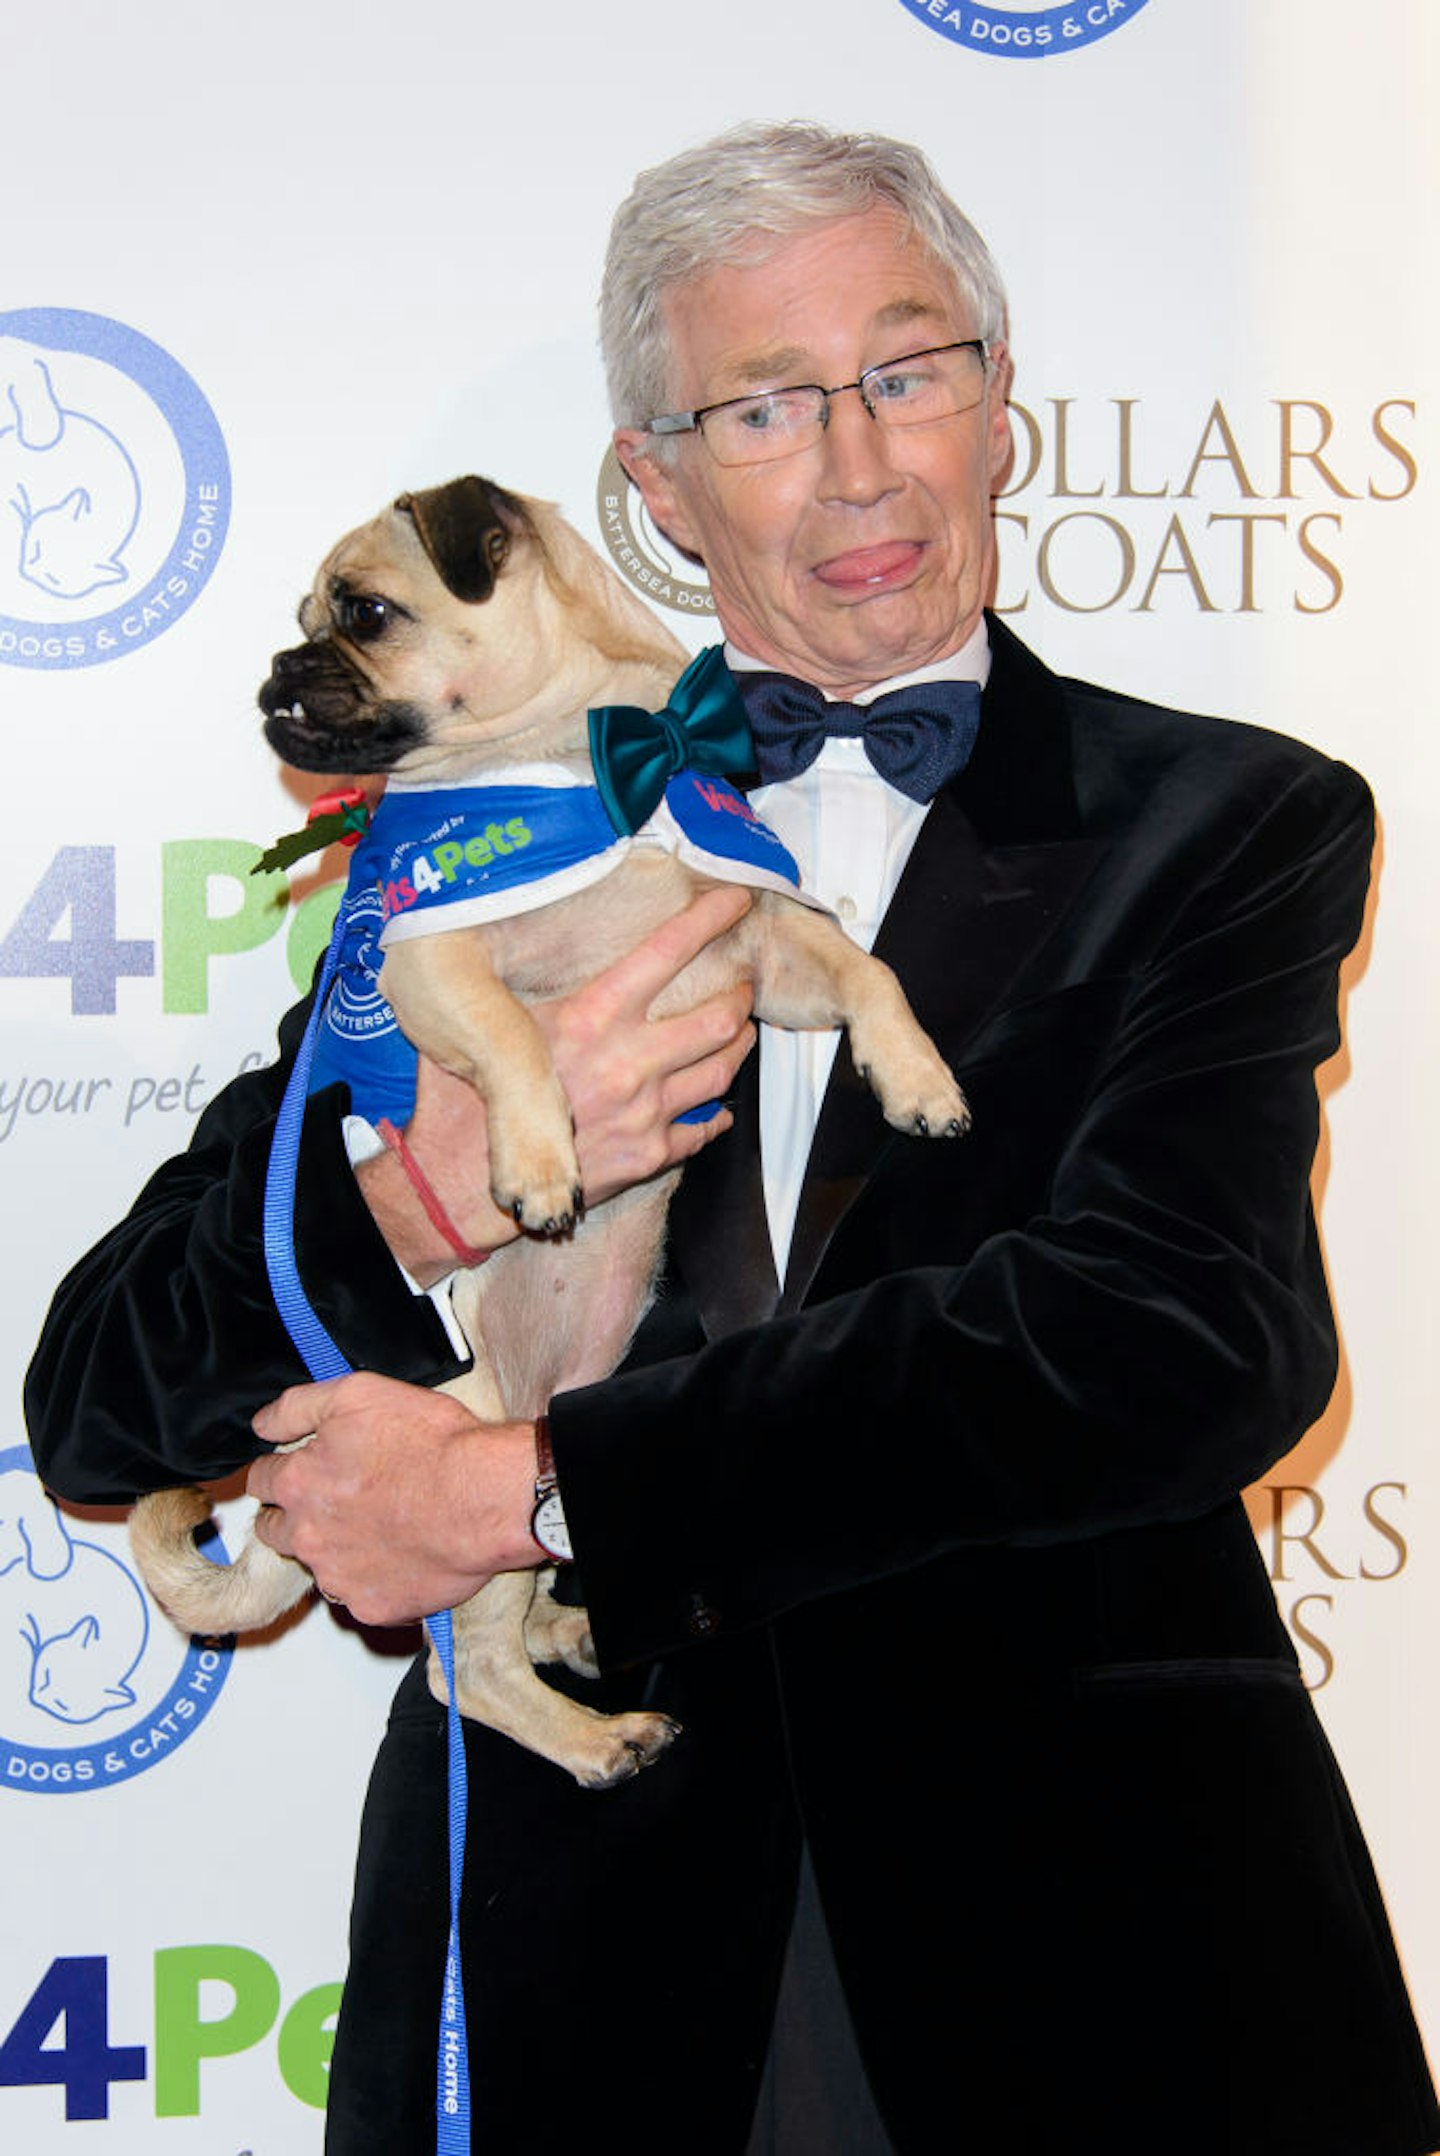 Paul O'Grady holding a dog whilst pulling funny face at awards show